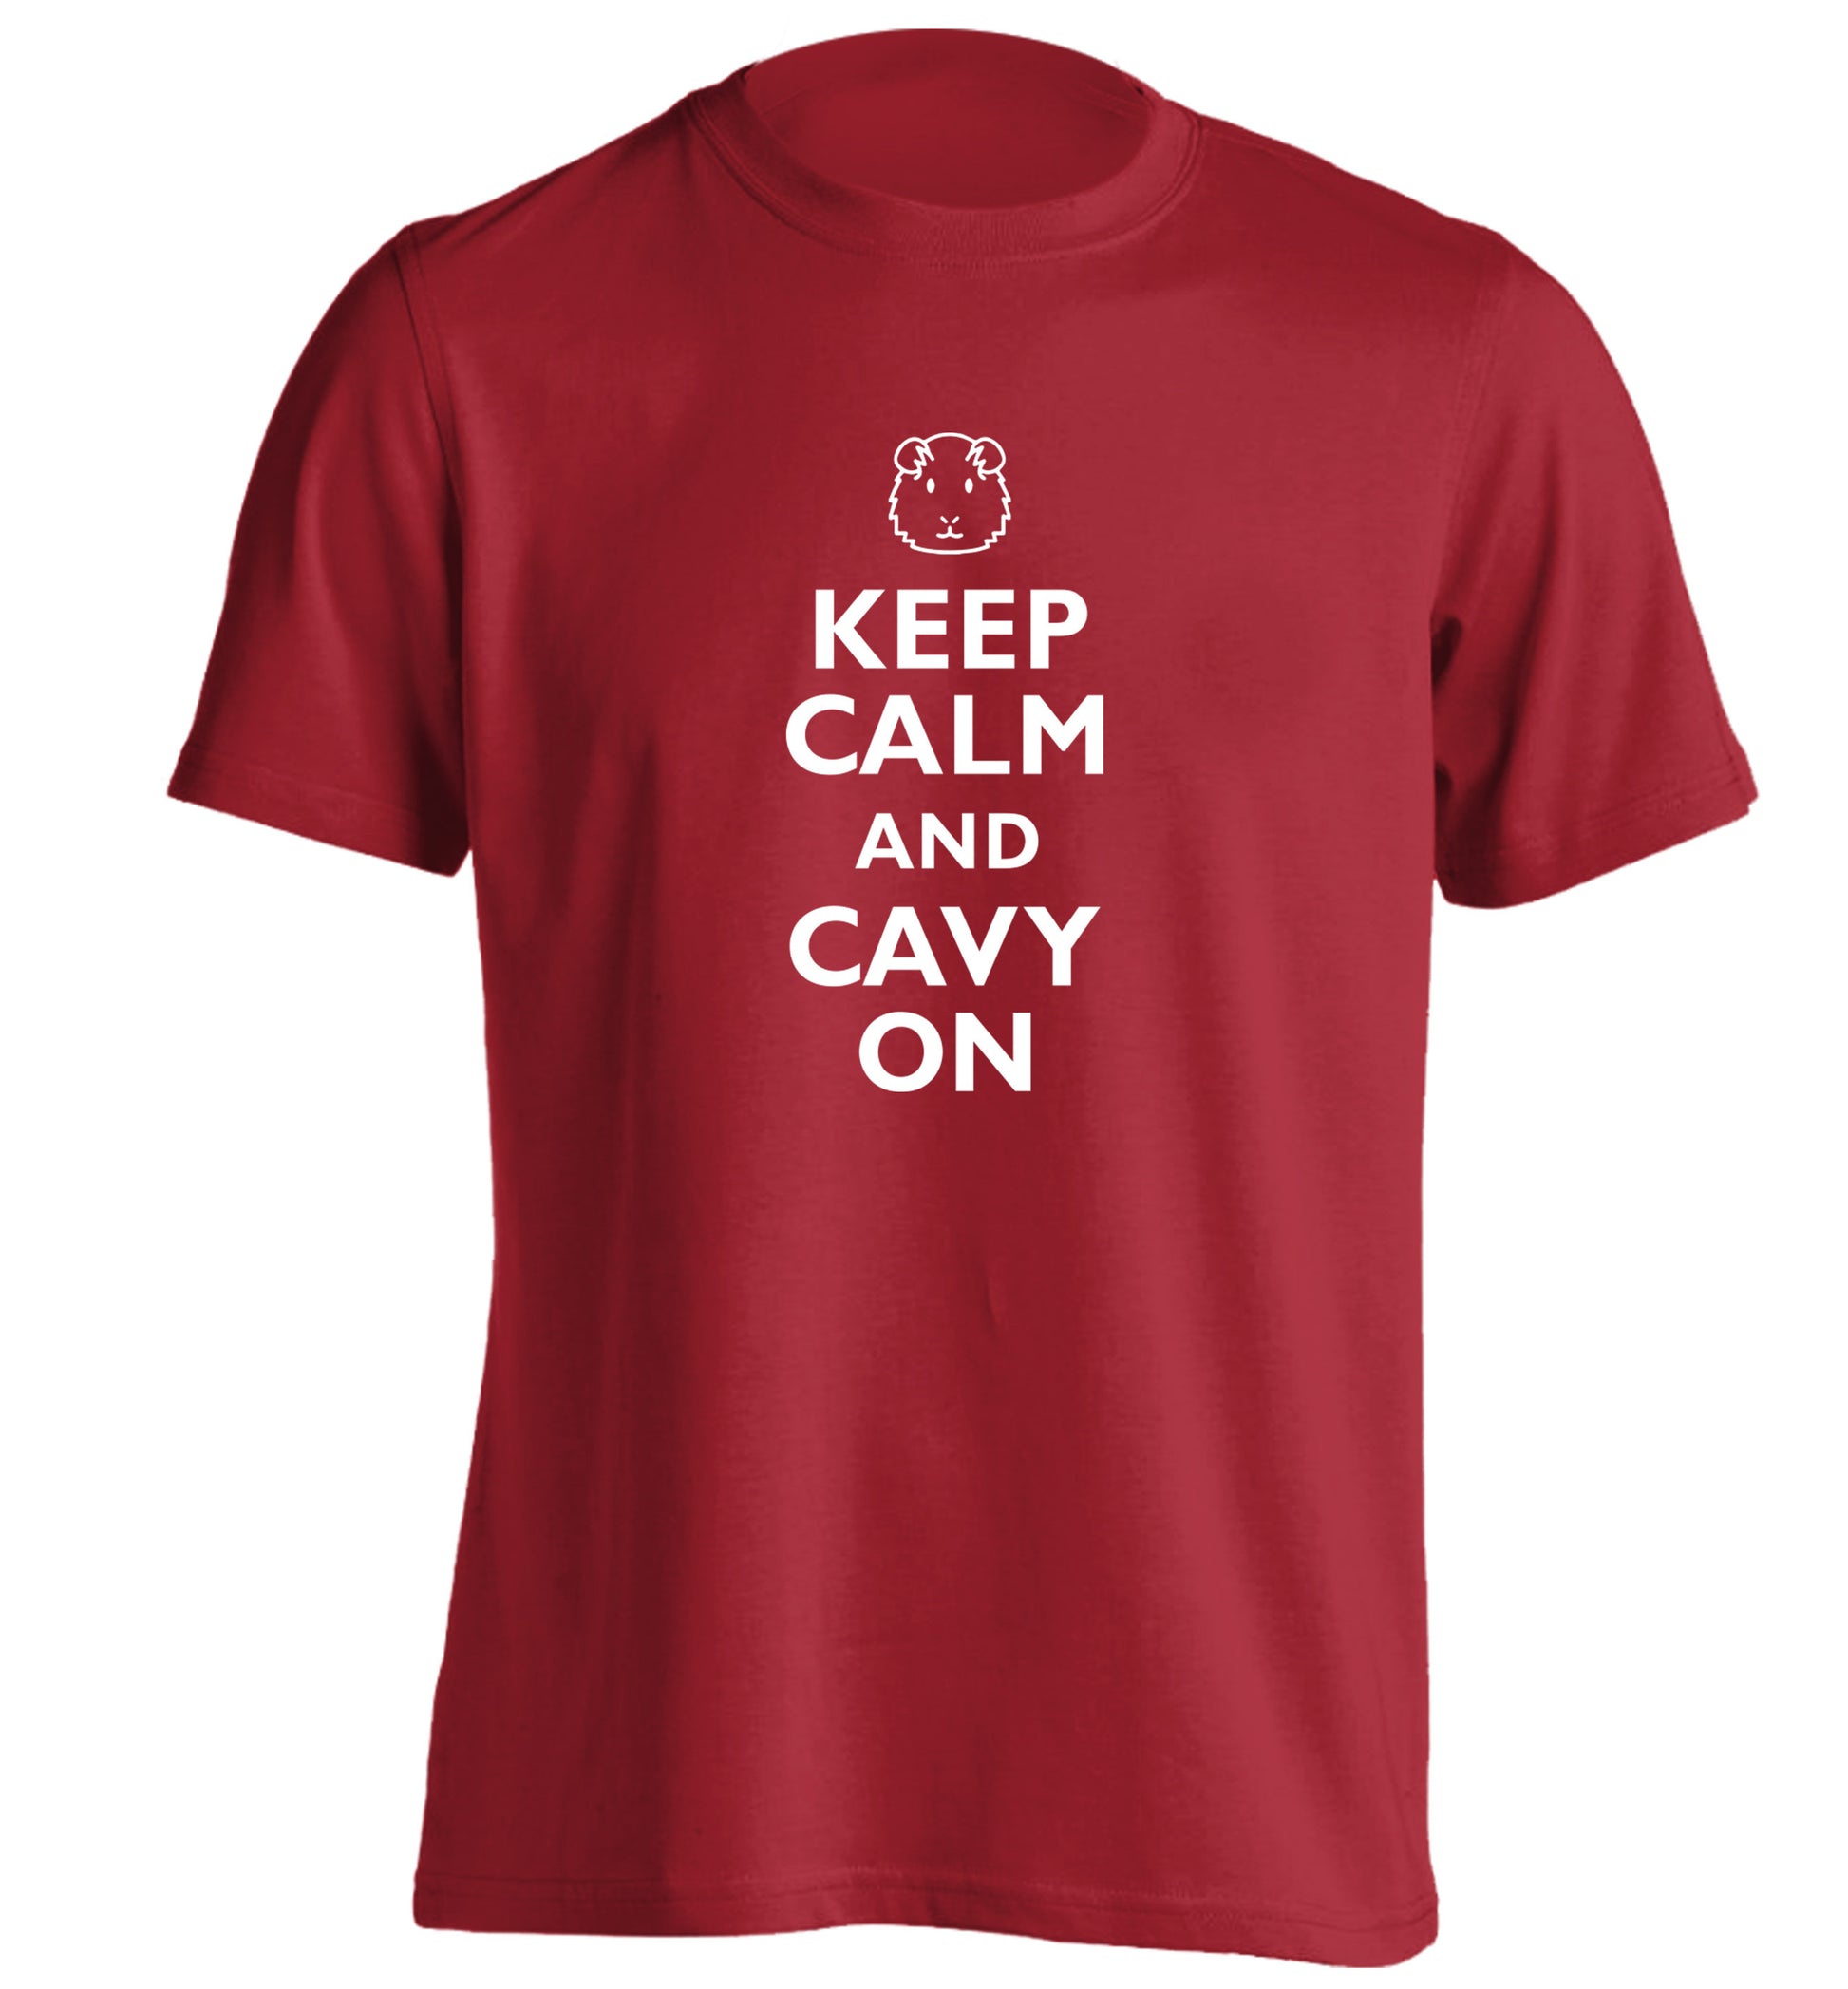 Keep calm and cavvy on adults unisex red Tshirt 2XL